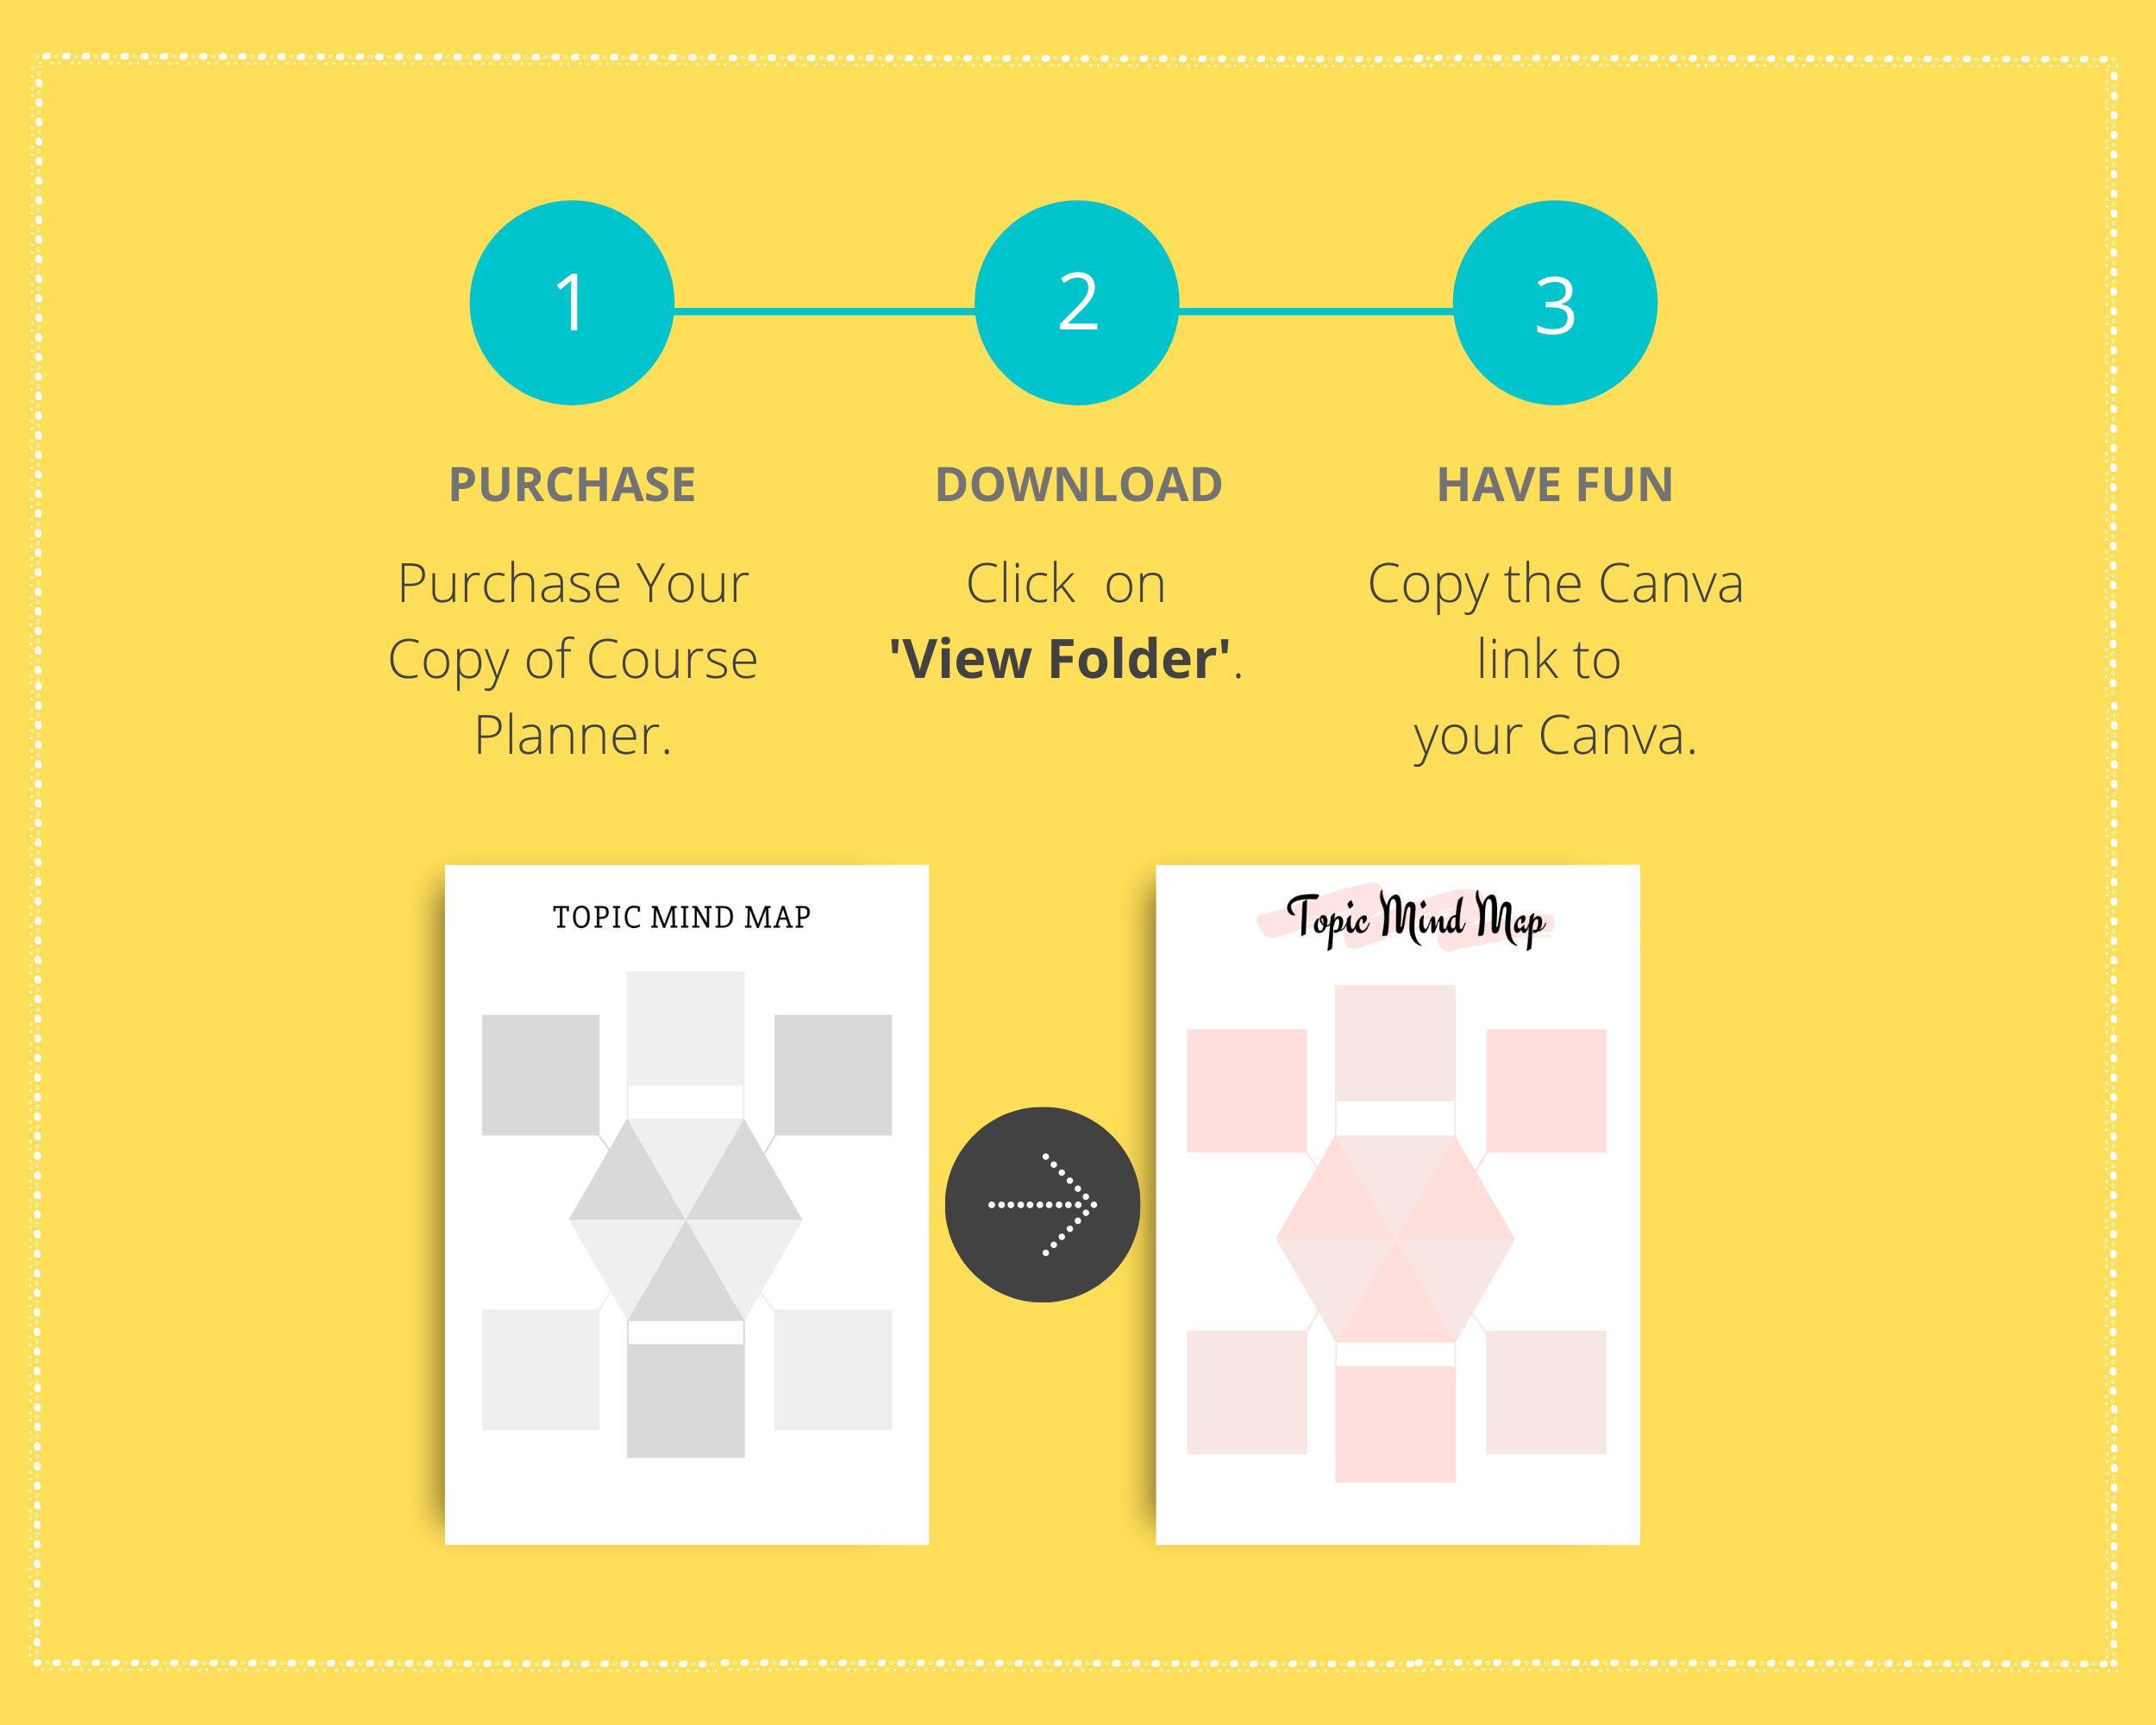 Editable Course Creation Planner in Canva | Commercial Use